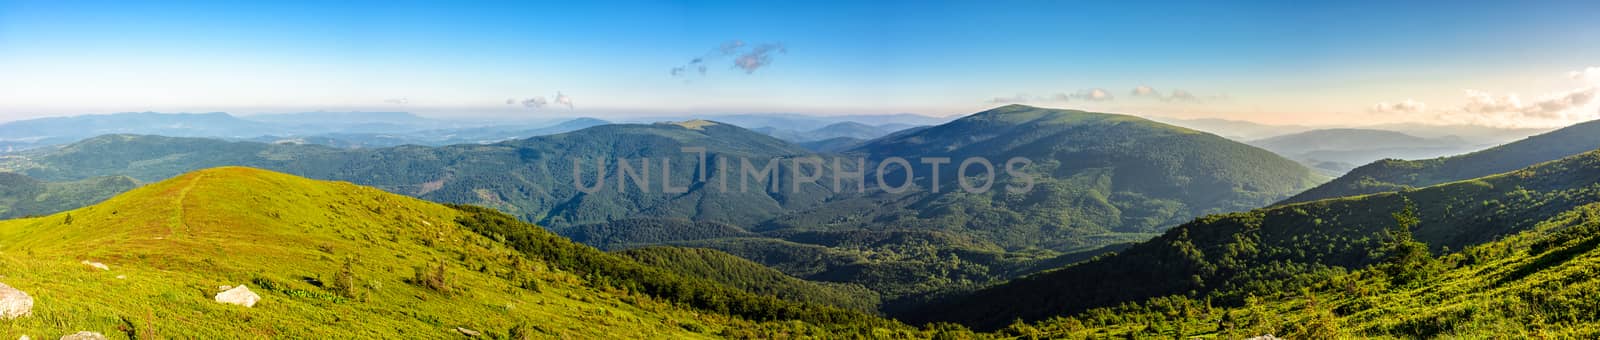 hillside panorama in mountains by Pellinni